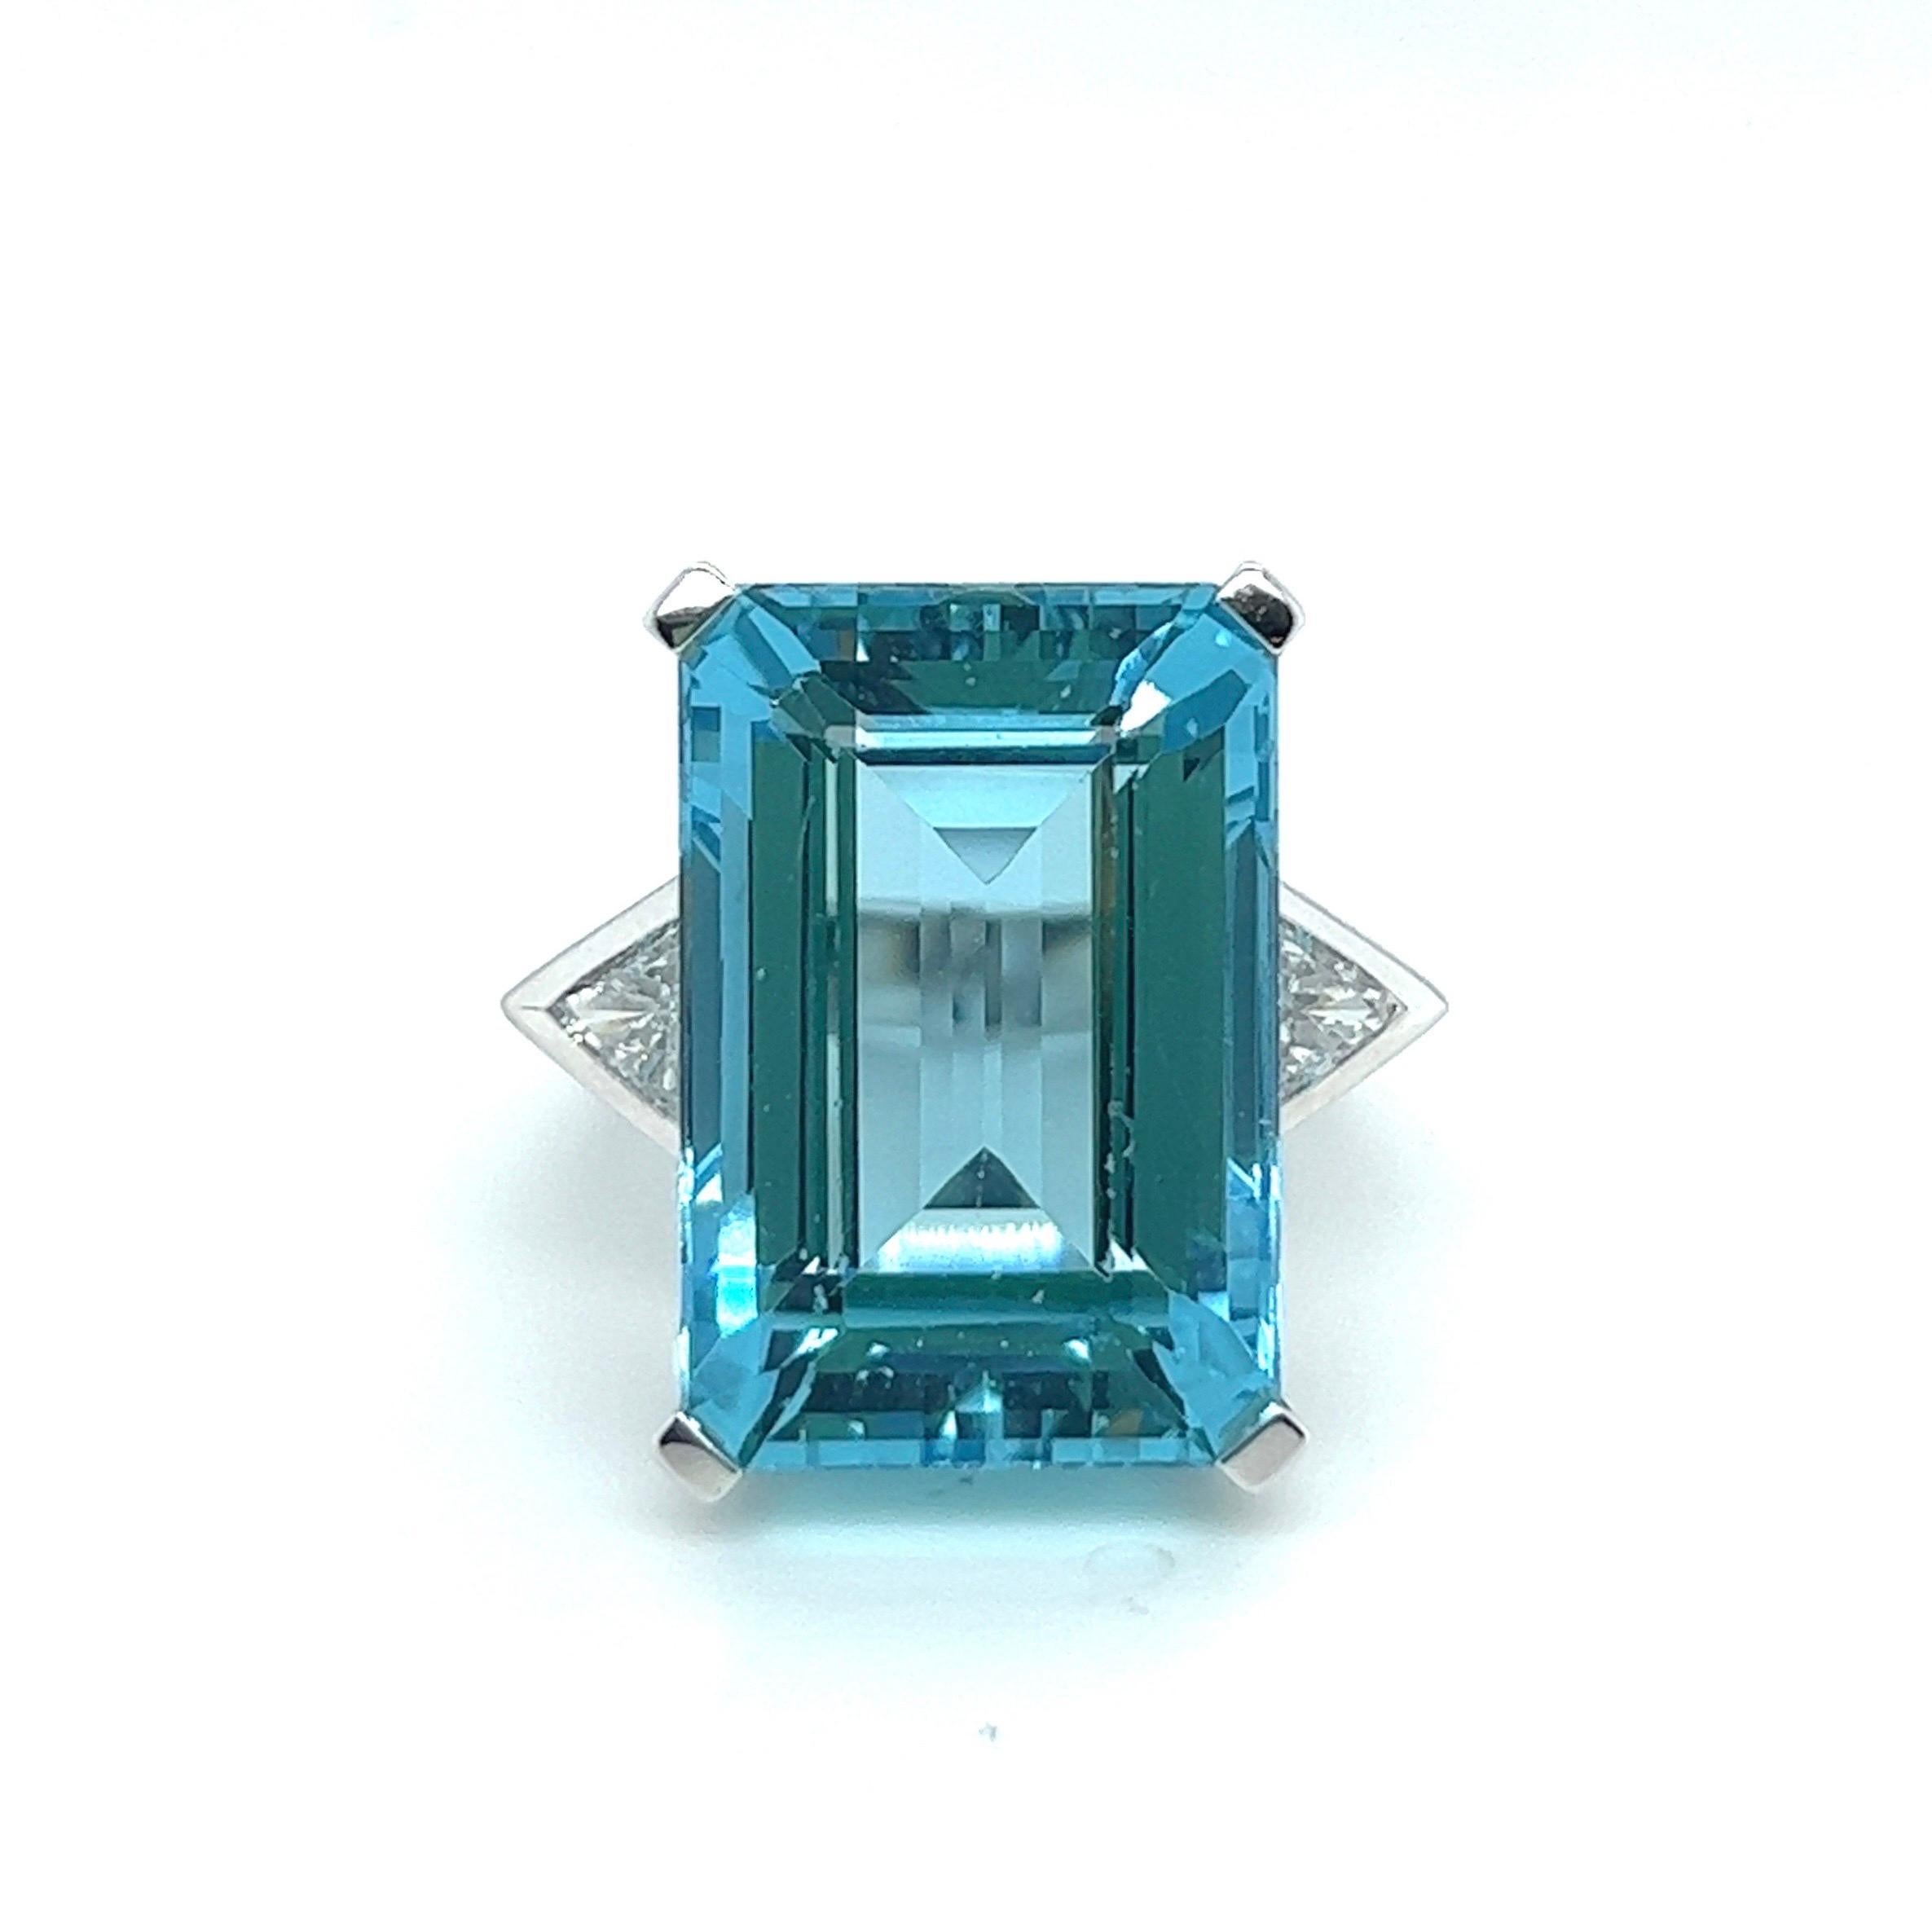 Stylish and eye-catching 18 karat white gold, aquamarine and diamond cocktail ring.

Crafted in 18 karat white gold, set with a luminous octagonal aquamarine of approximately 16 carats and flanked by two trilliant-cut diamonds totalling circa 0.6